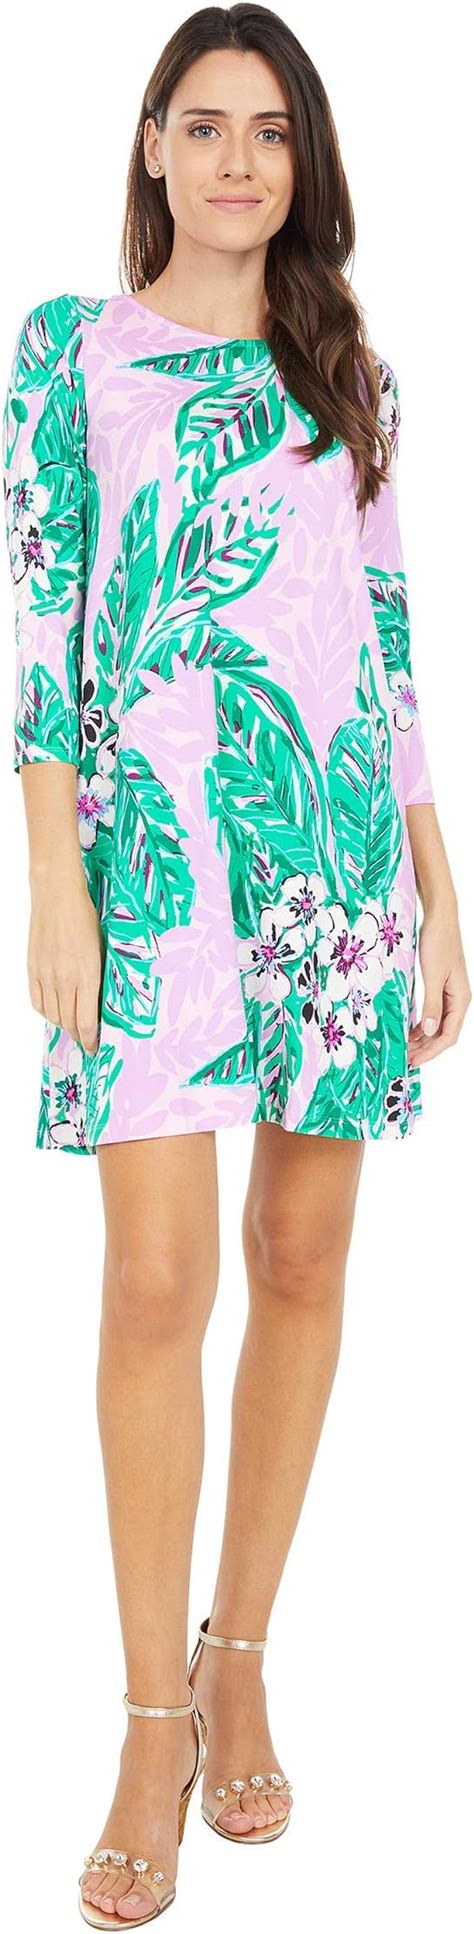 Lilly Pulitzer Womens 24176 Ophelia Dress At Amazon Womens Clothing